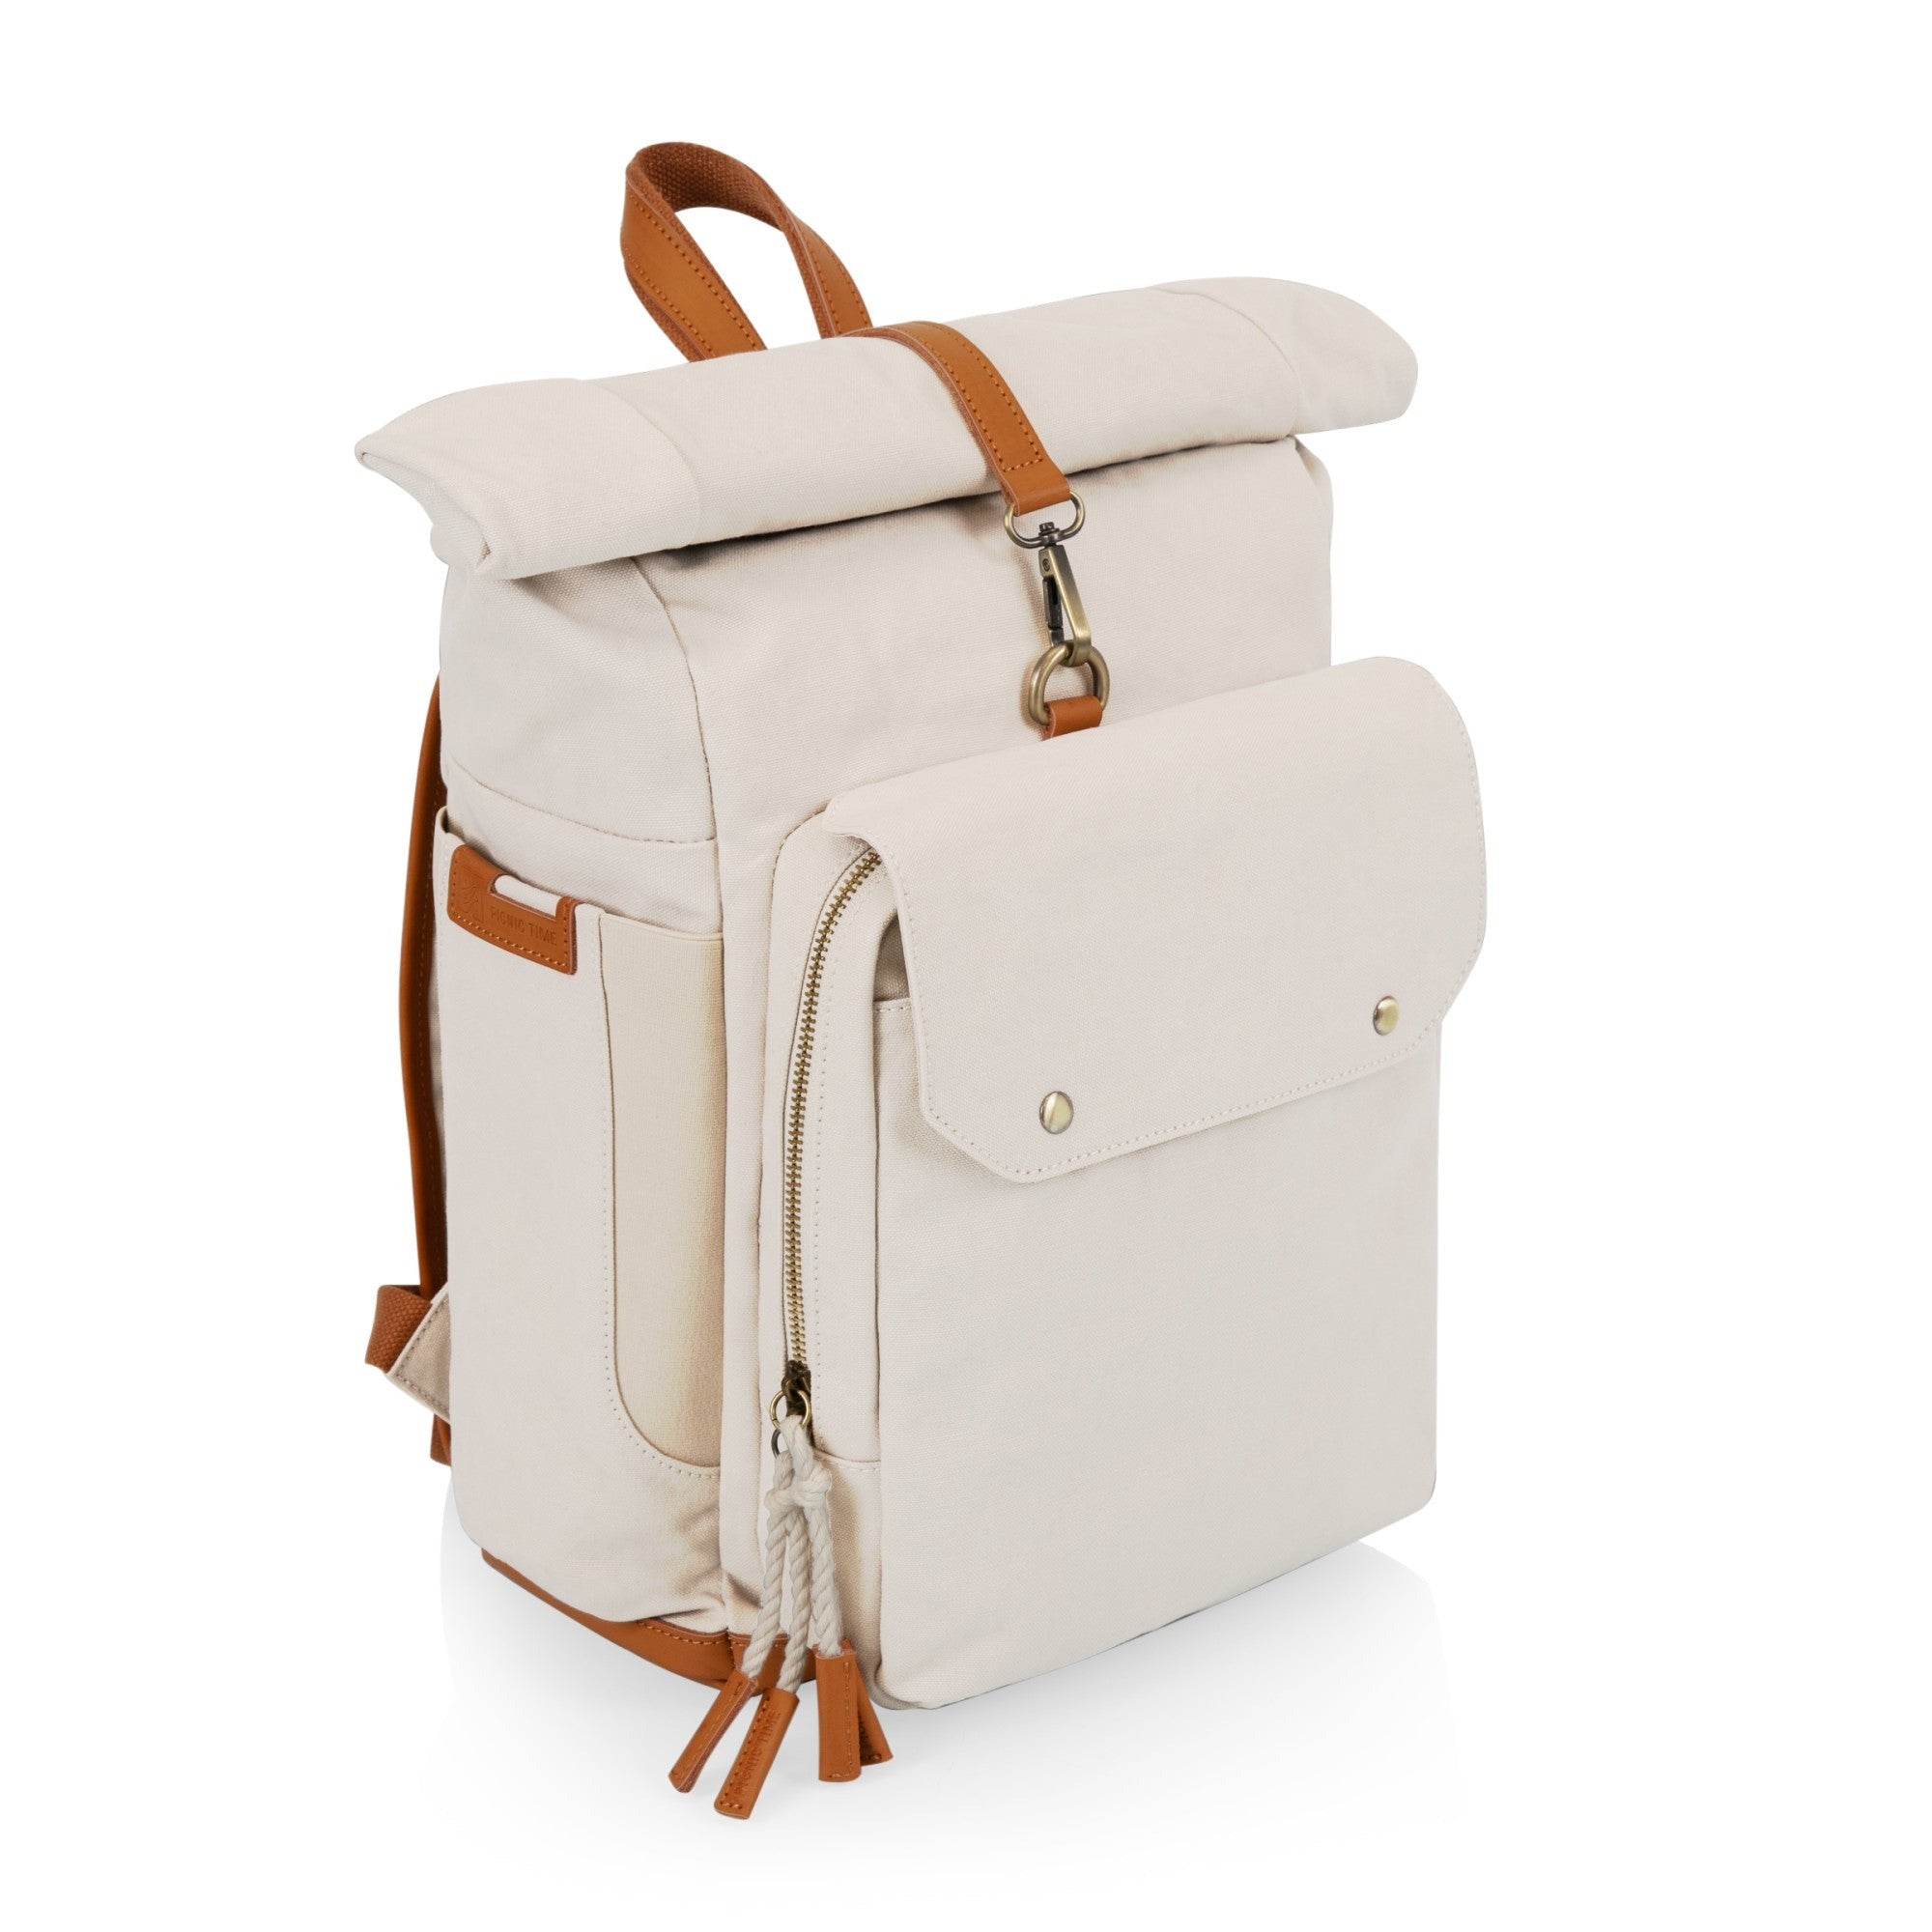 Picnic Time Carmel Roll Top Insulated Rucksack Canvas - Tan